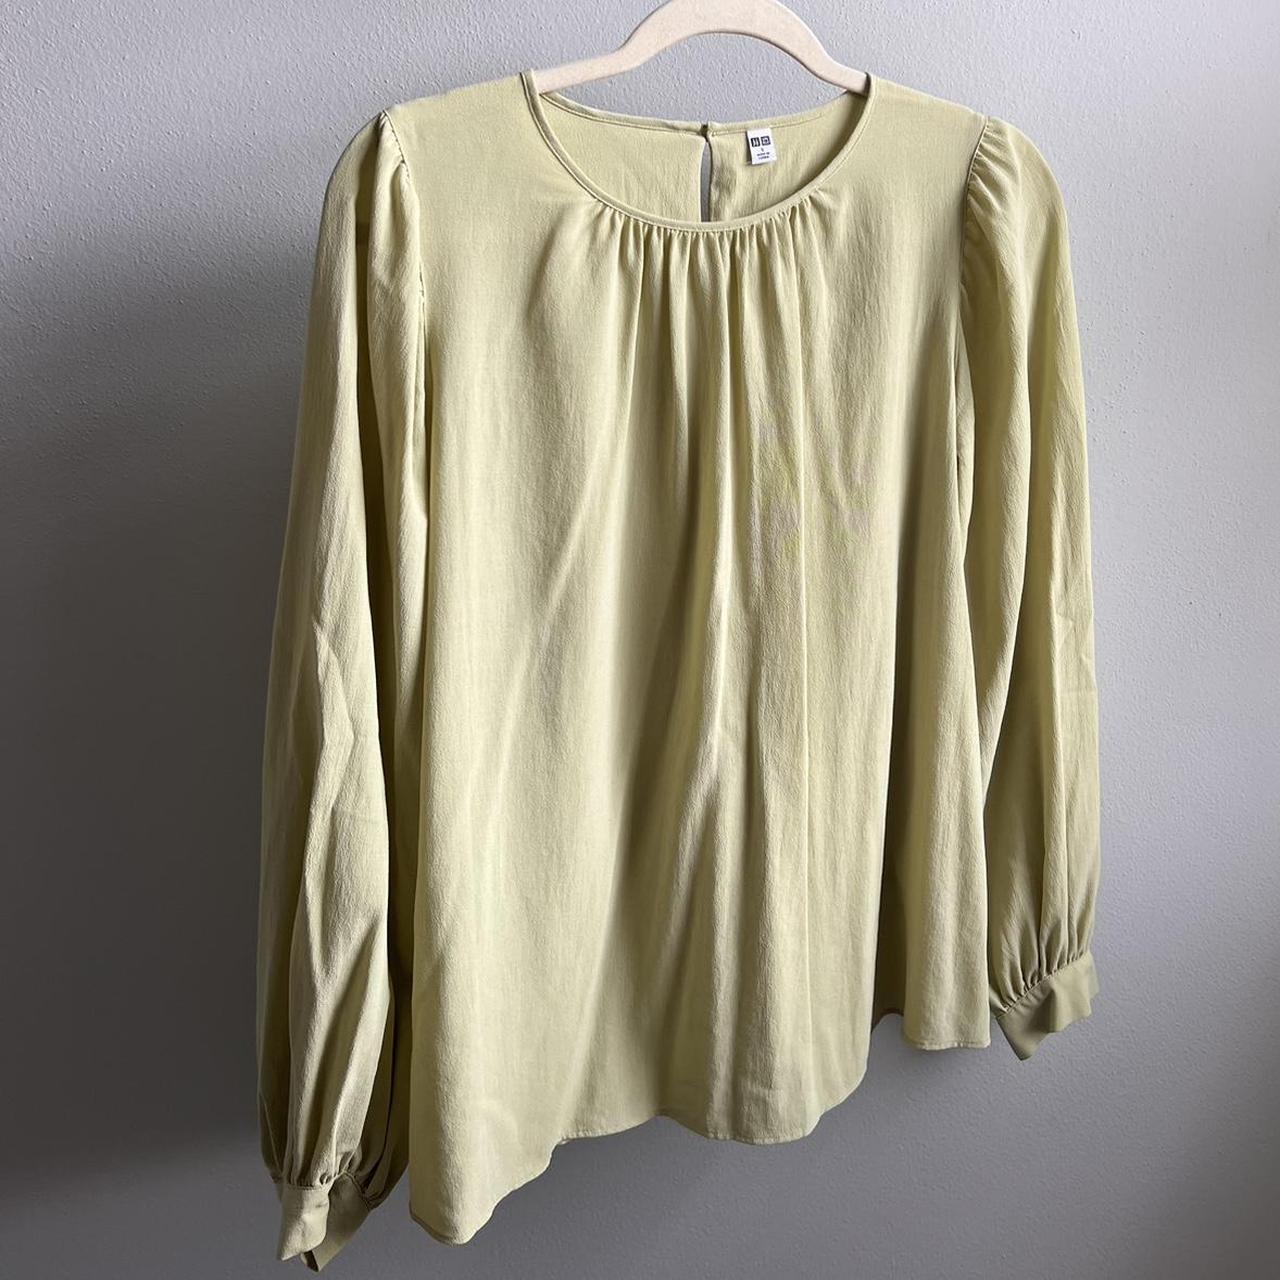 ON HOLD DO NOT PURCHASE! UNIQLO SMALL $8 Lemon-grass... - Depop